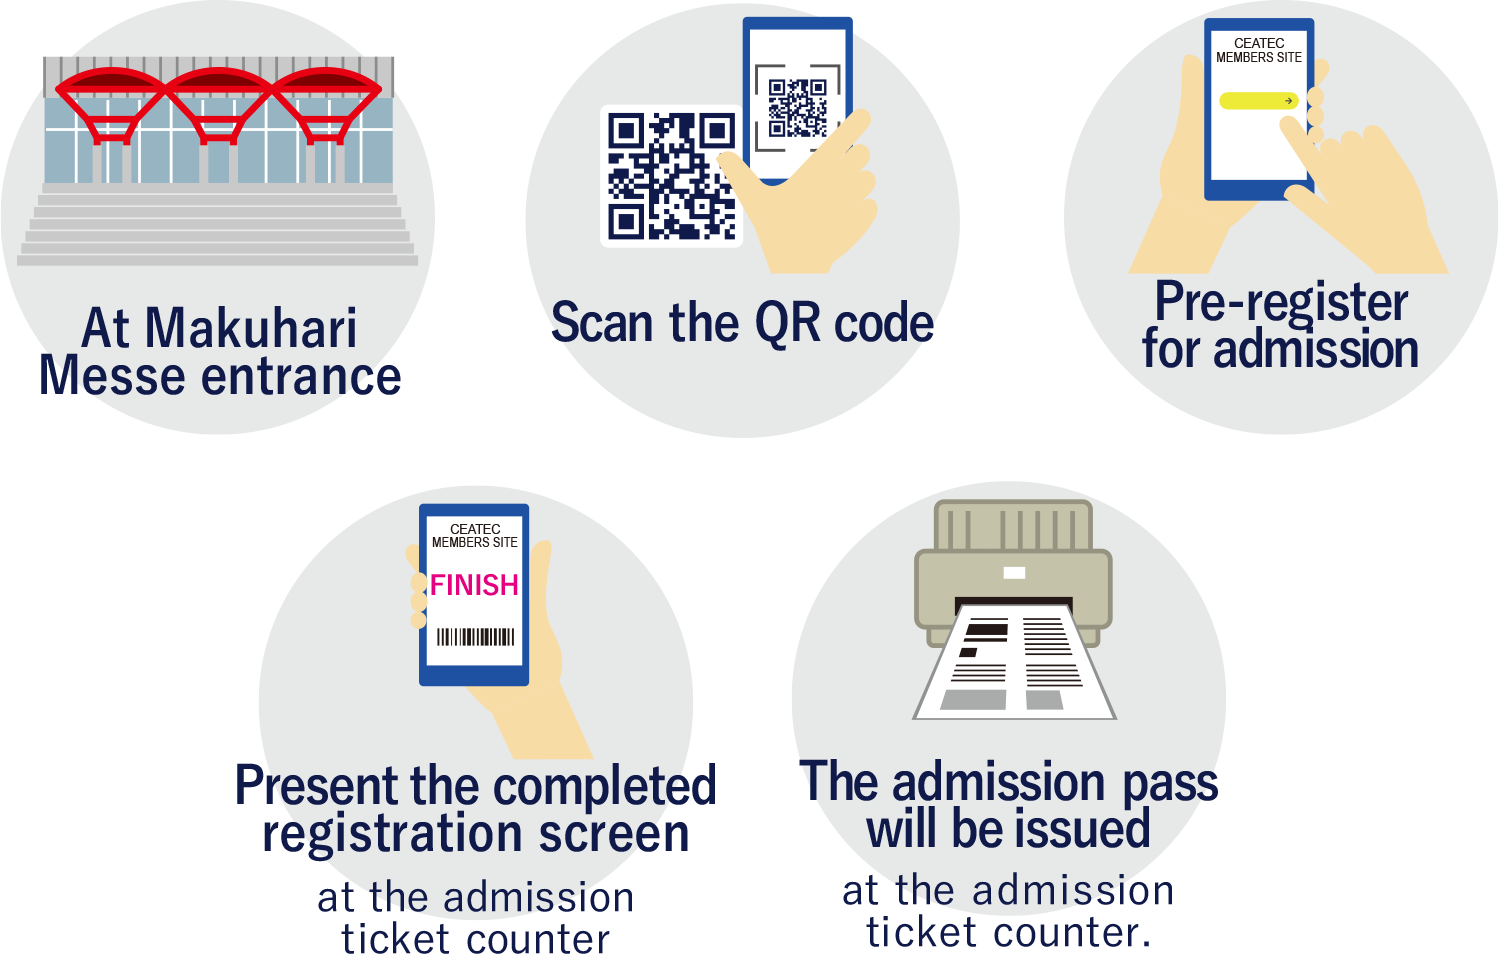 Access from your smartphone while on the train or bus → Scan the QR code → Pre-register for admission → Present the completed registration screen at the admission ticket counter → The admission pass will be issued at the admission ticket counter